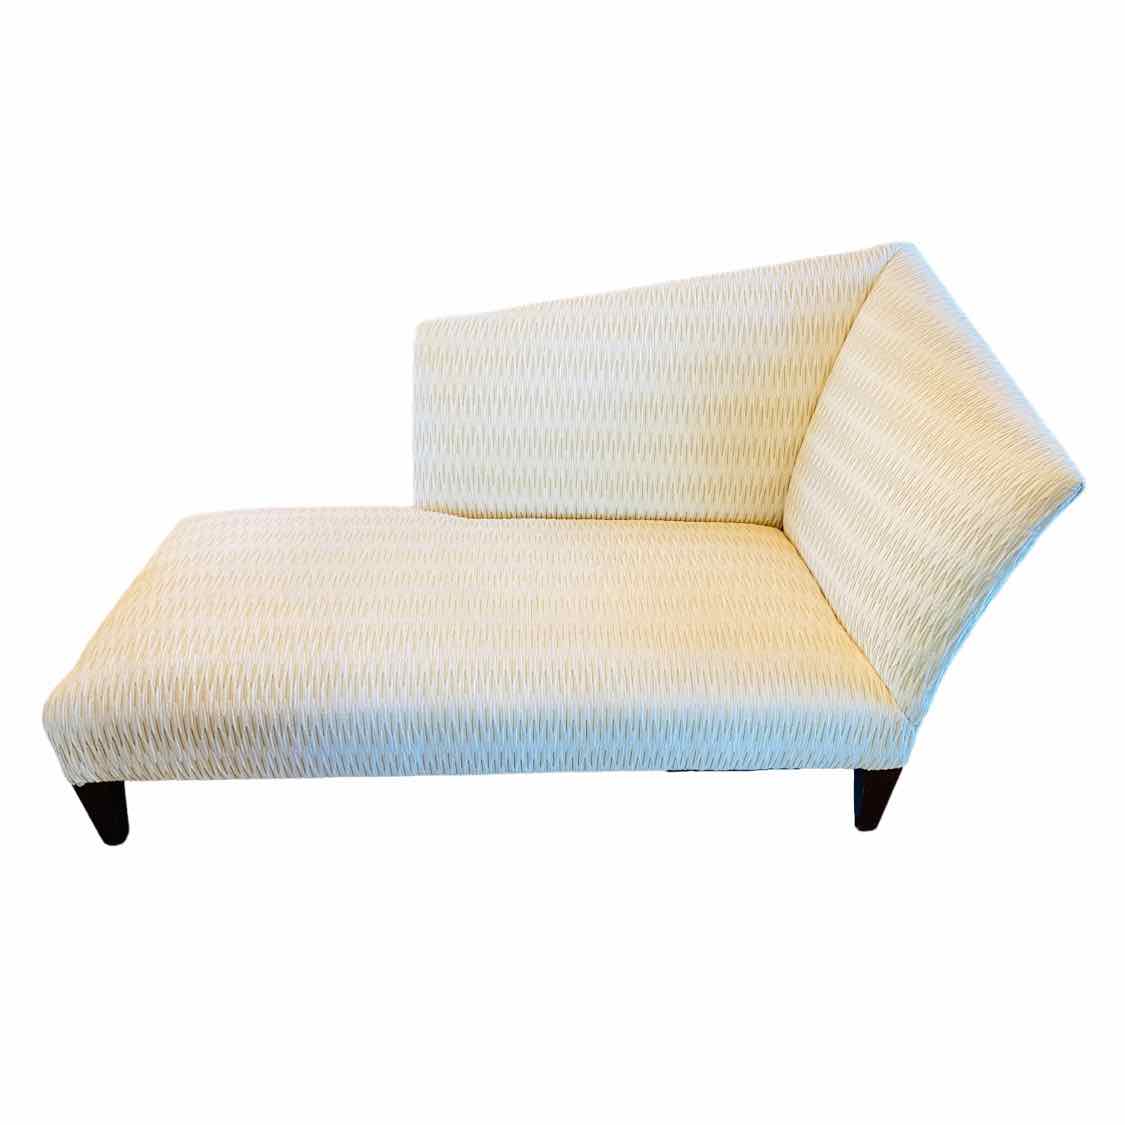 'Spirit' Chaise Lounge by John Hutton for Donghia